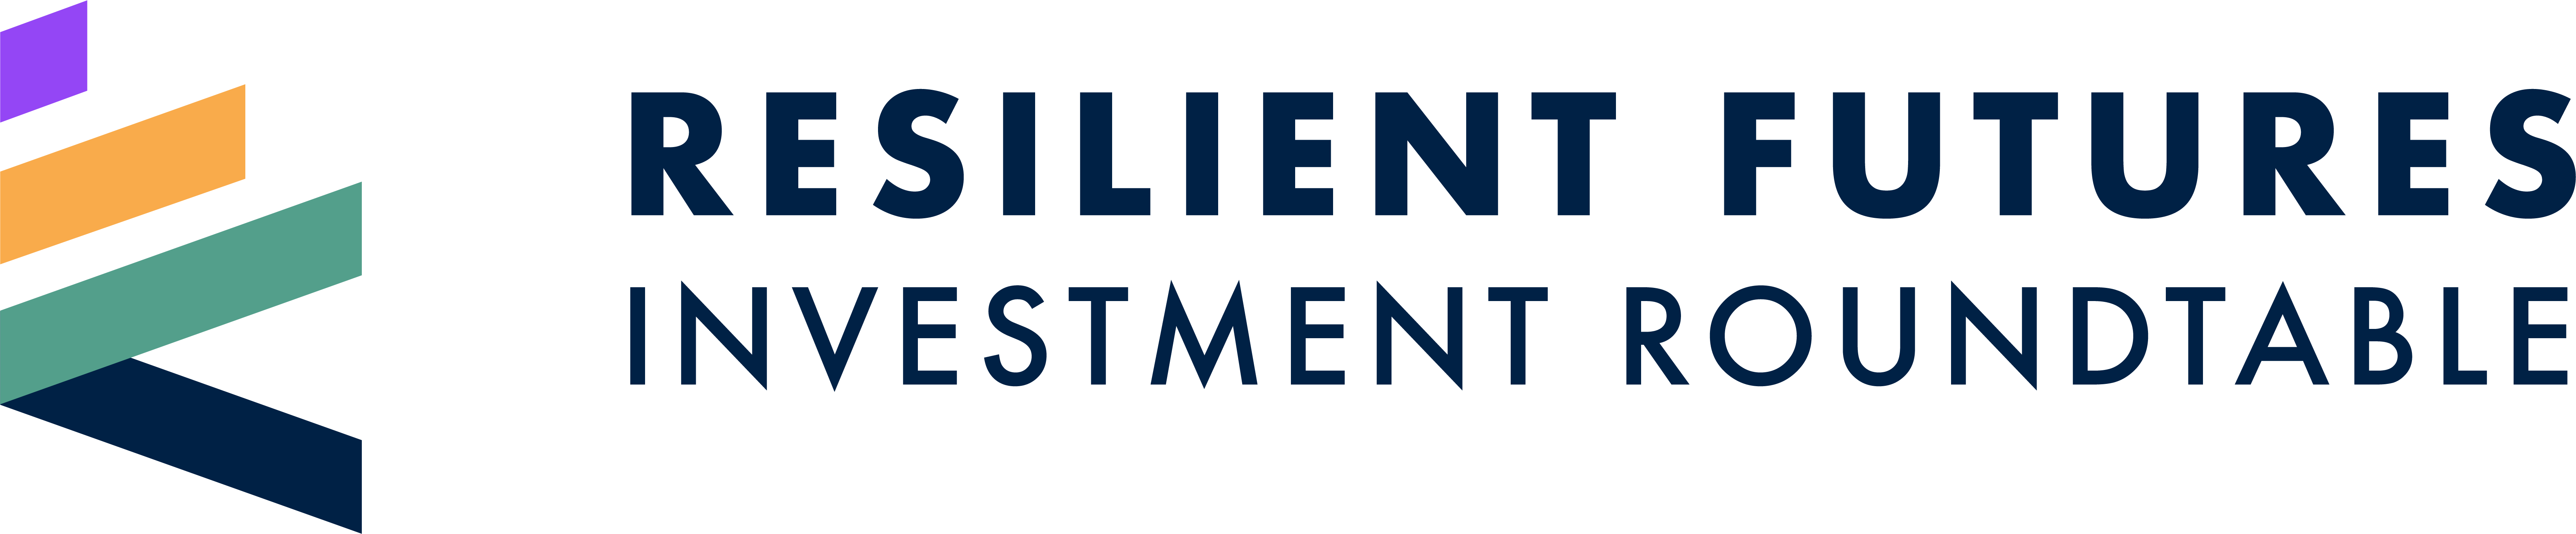 Resilient Futures Investment Roundtable